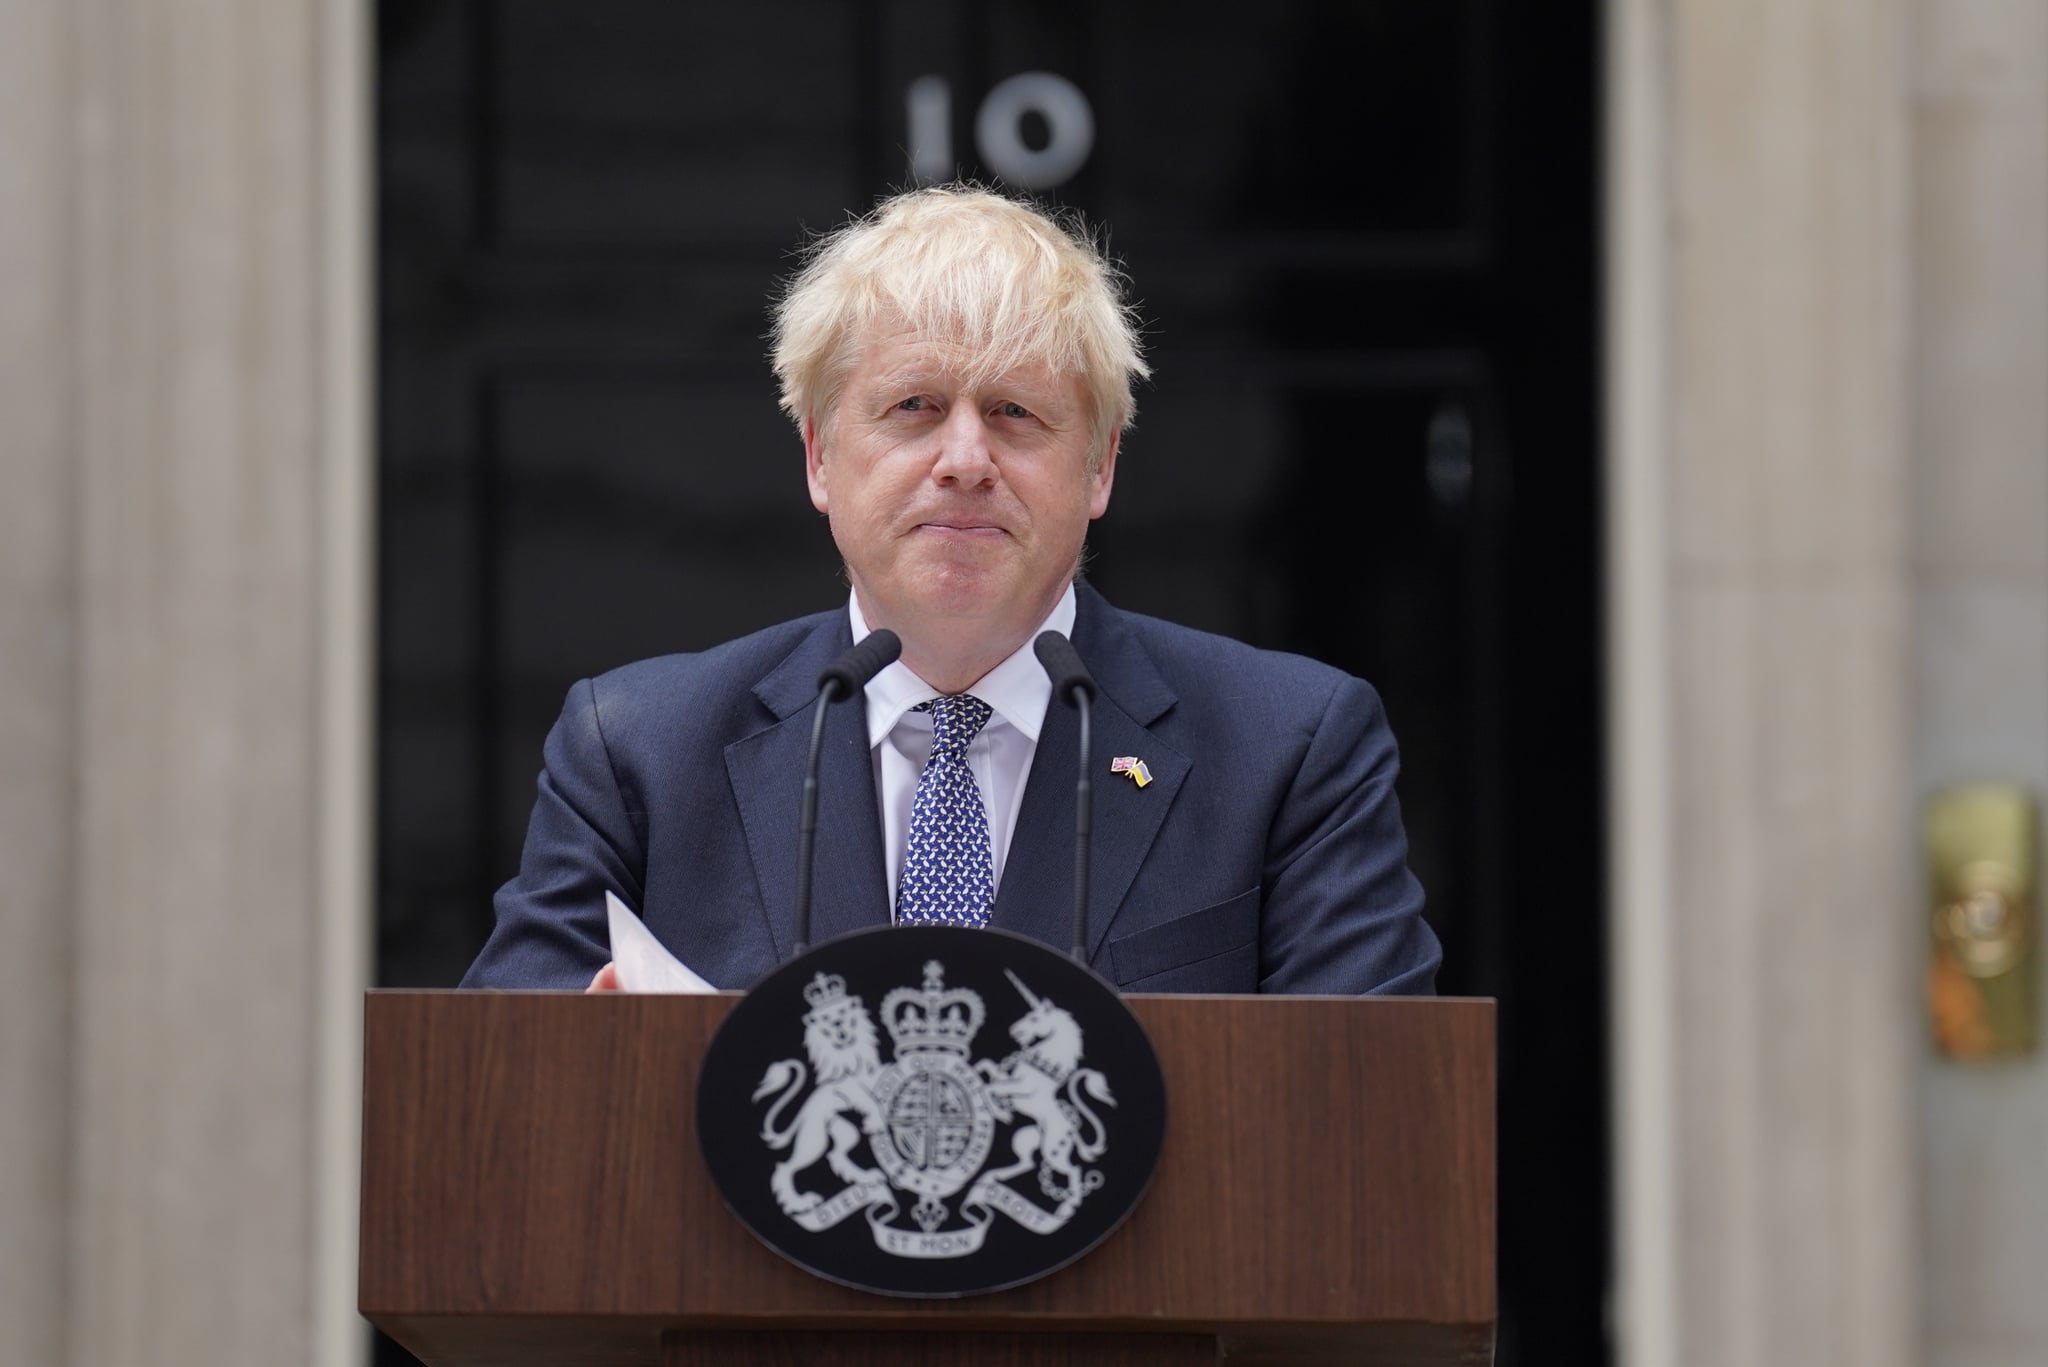 Prime Minister Boris Johnson reads a statement outside 10 Downing Street, London, formally resigning as Conservative Party leader after ministers and MPs made clear his position was untenable. He will remain as Prime Minister until a successor is in place. Picture date: Thursday July 7, 2022. (Photo by Stefan Rousseau/PA Images via Getty Images)